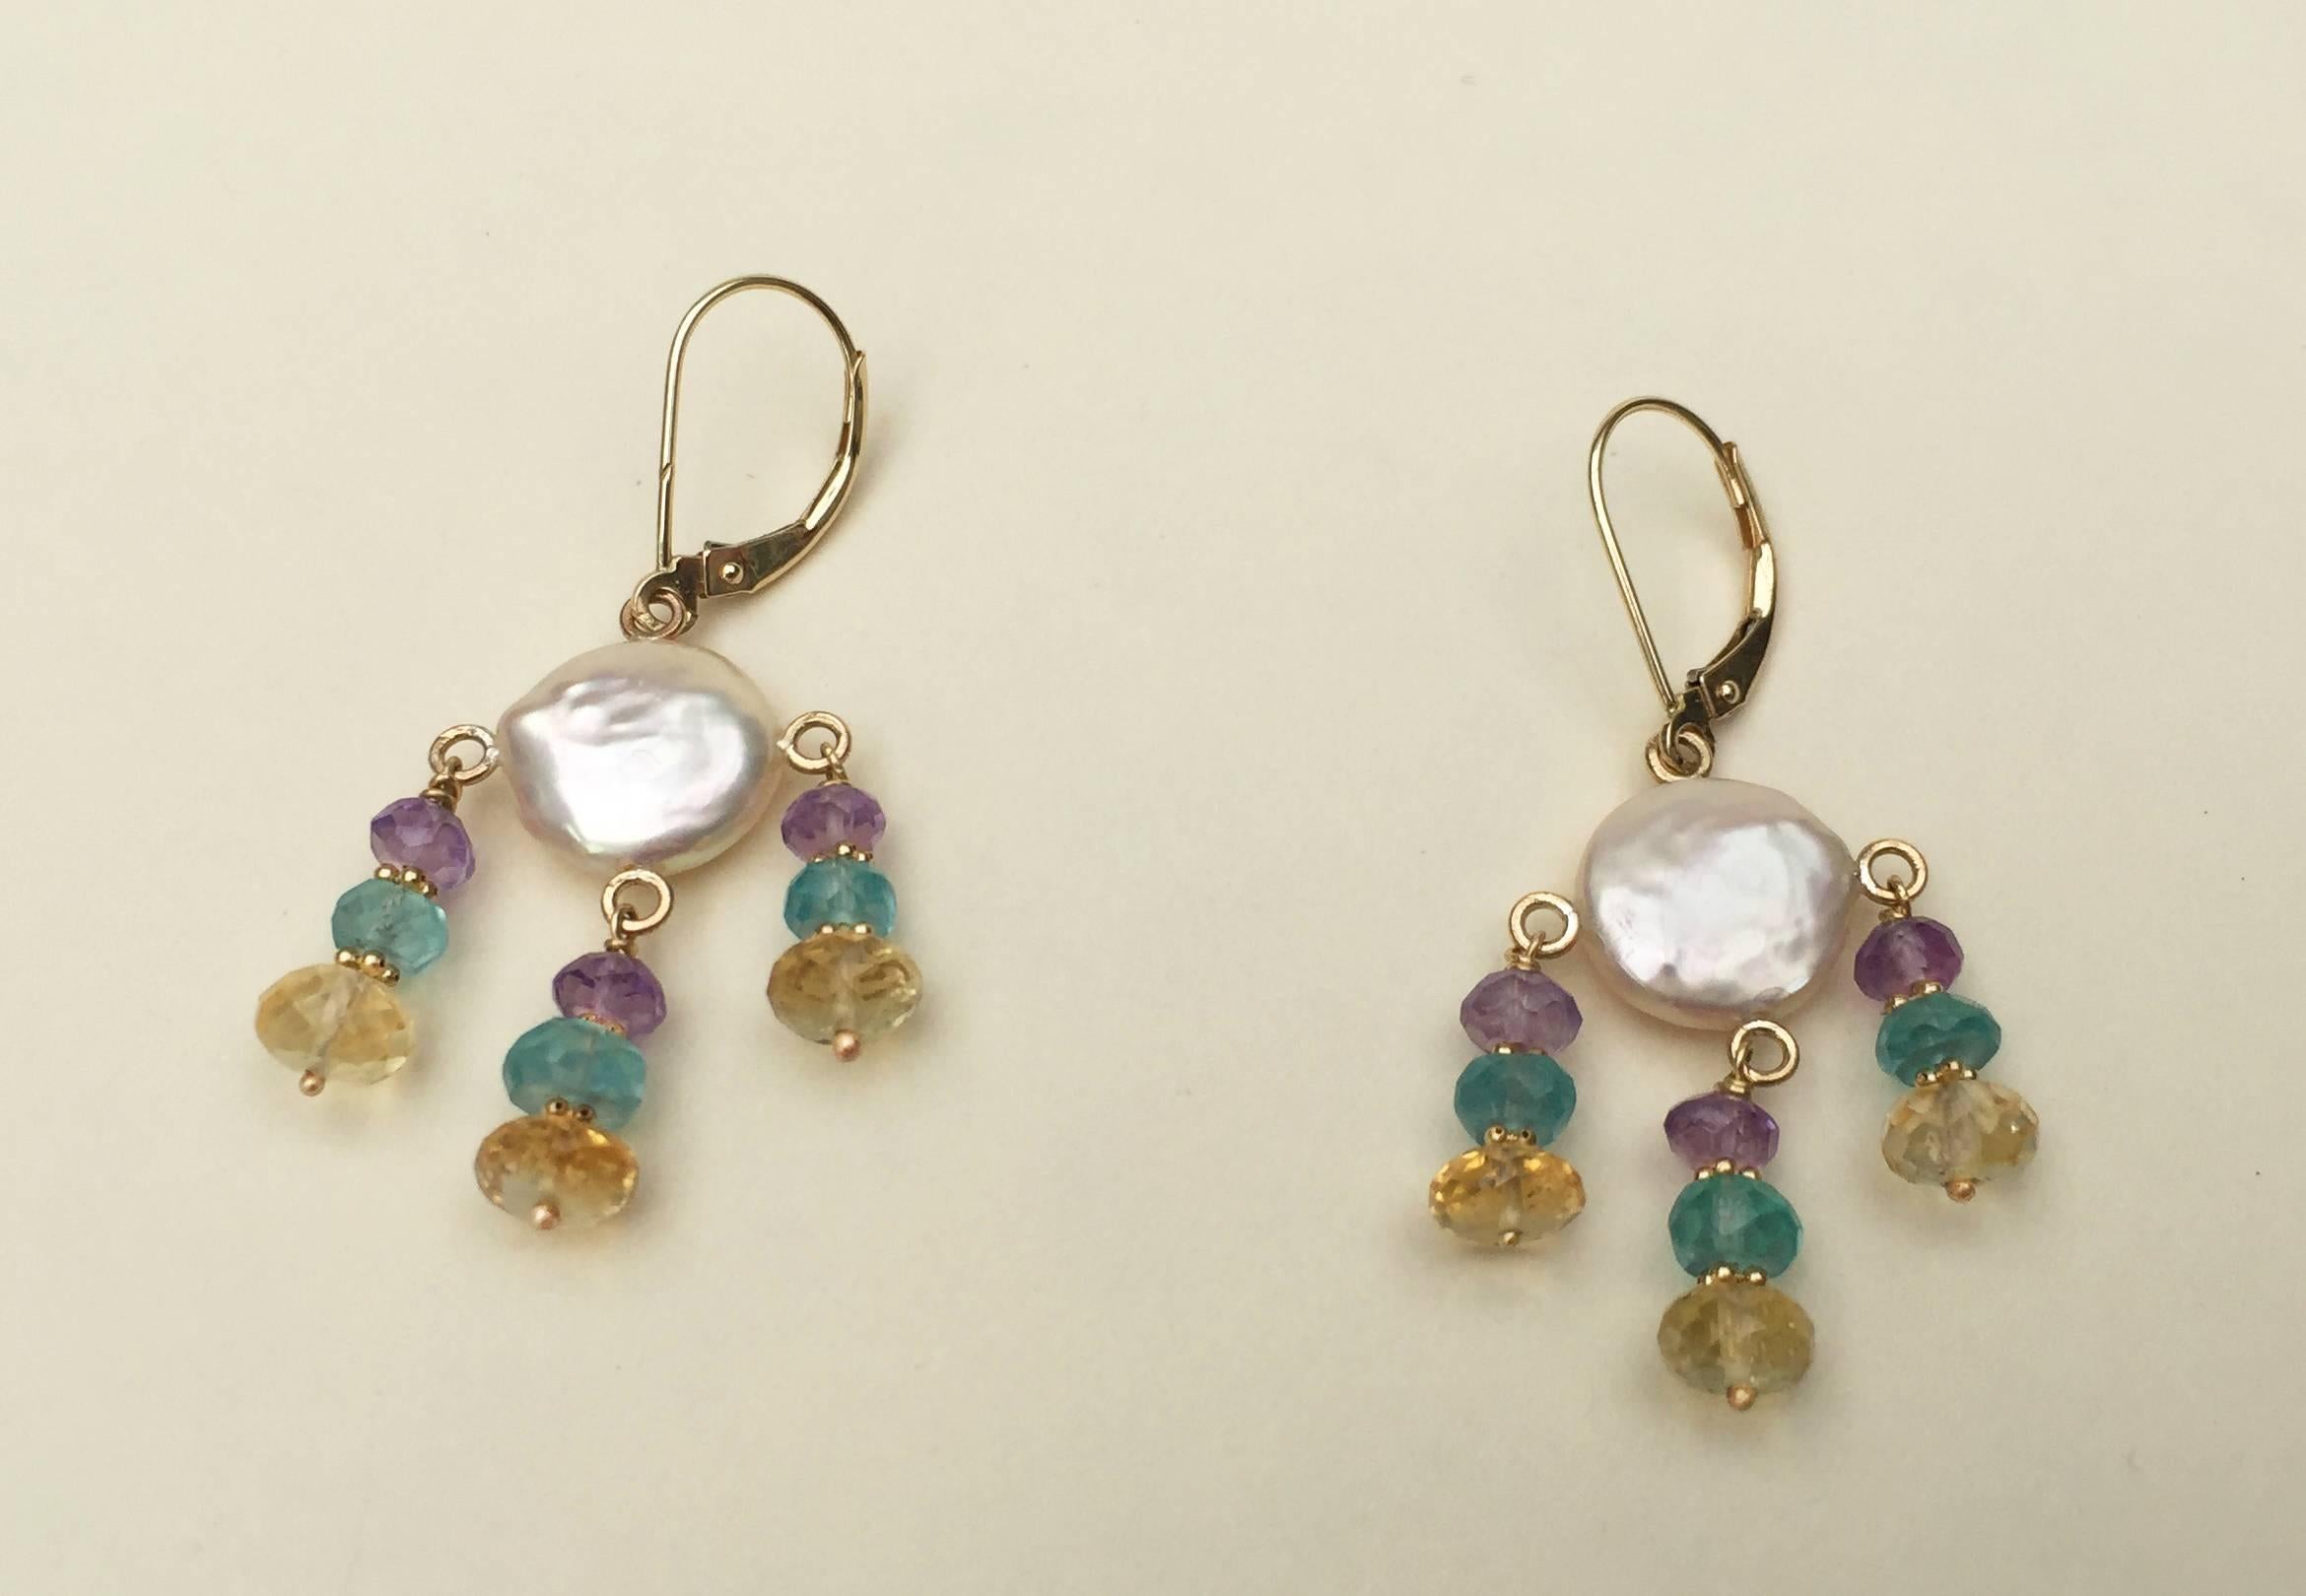 Women's White Pearl Earrings with Amethyst, Topaz, Citrine and 14 Karat Gold by Marina J For Sale